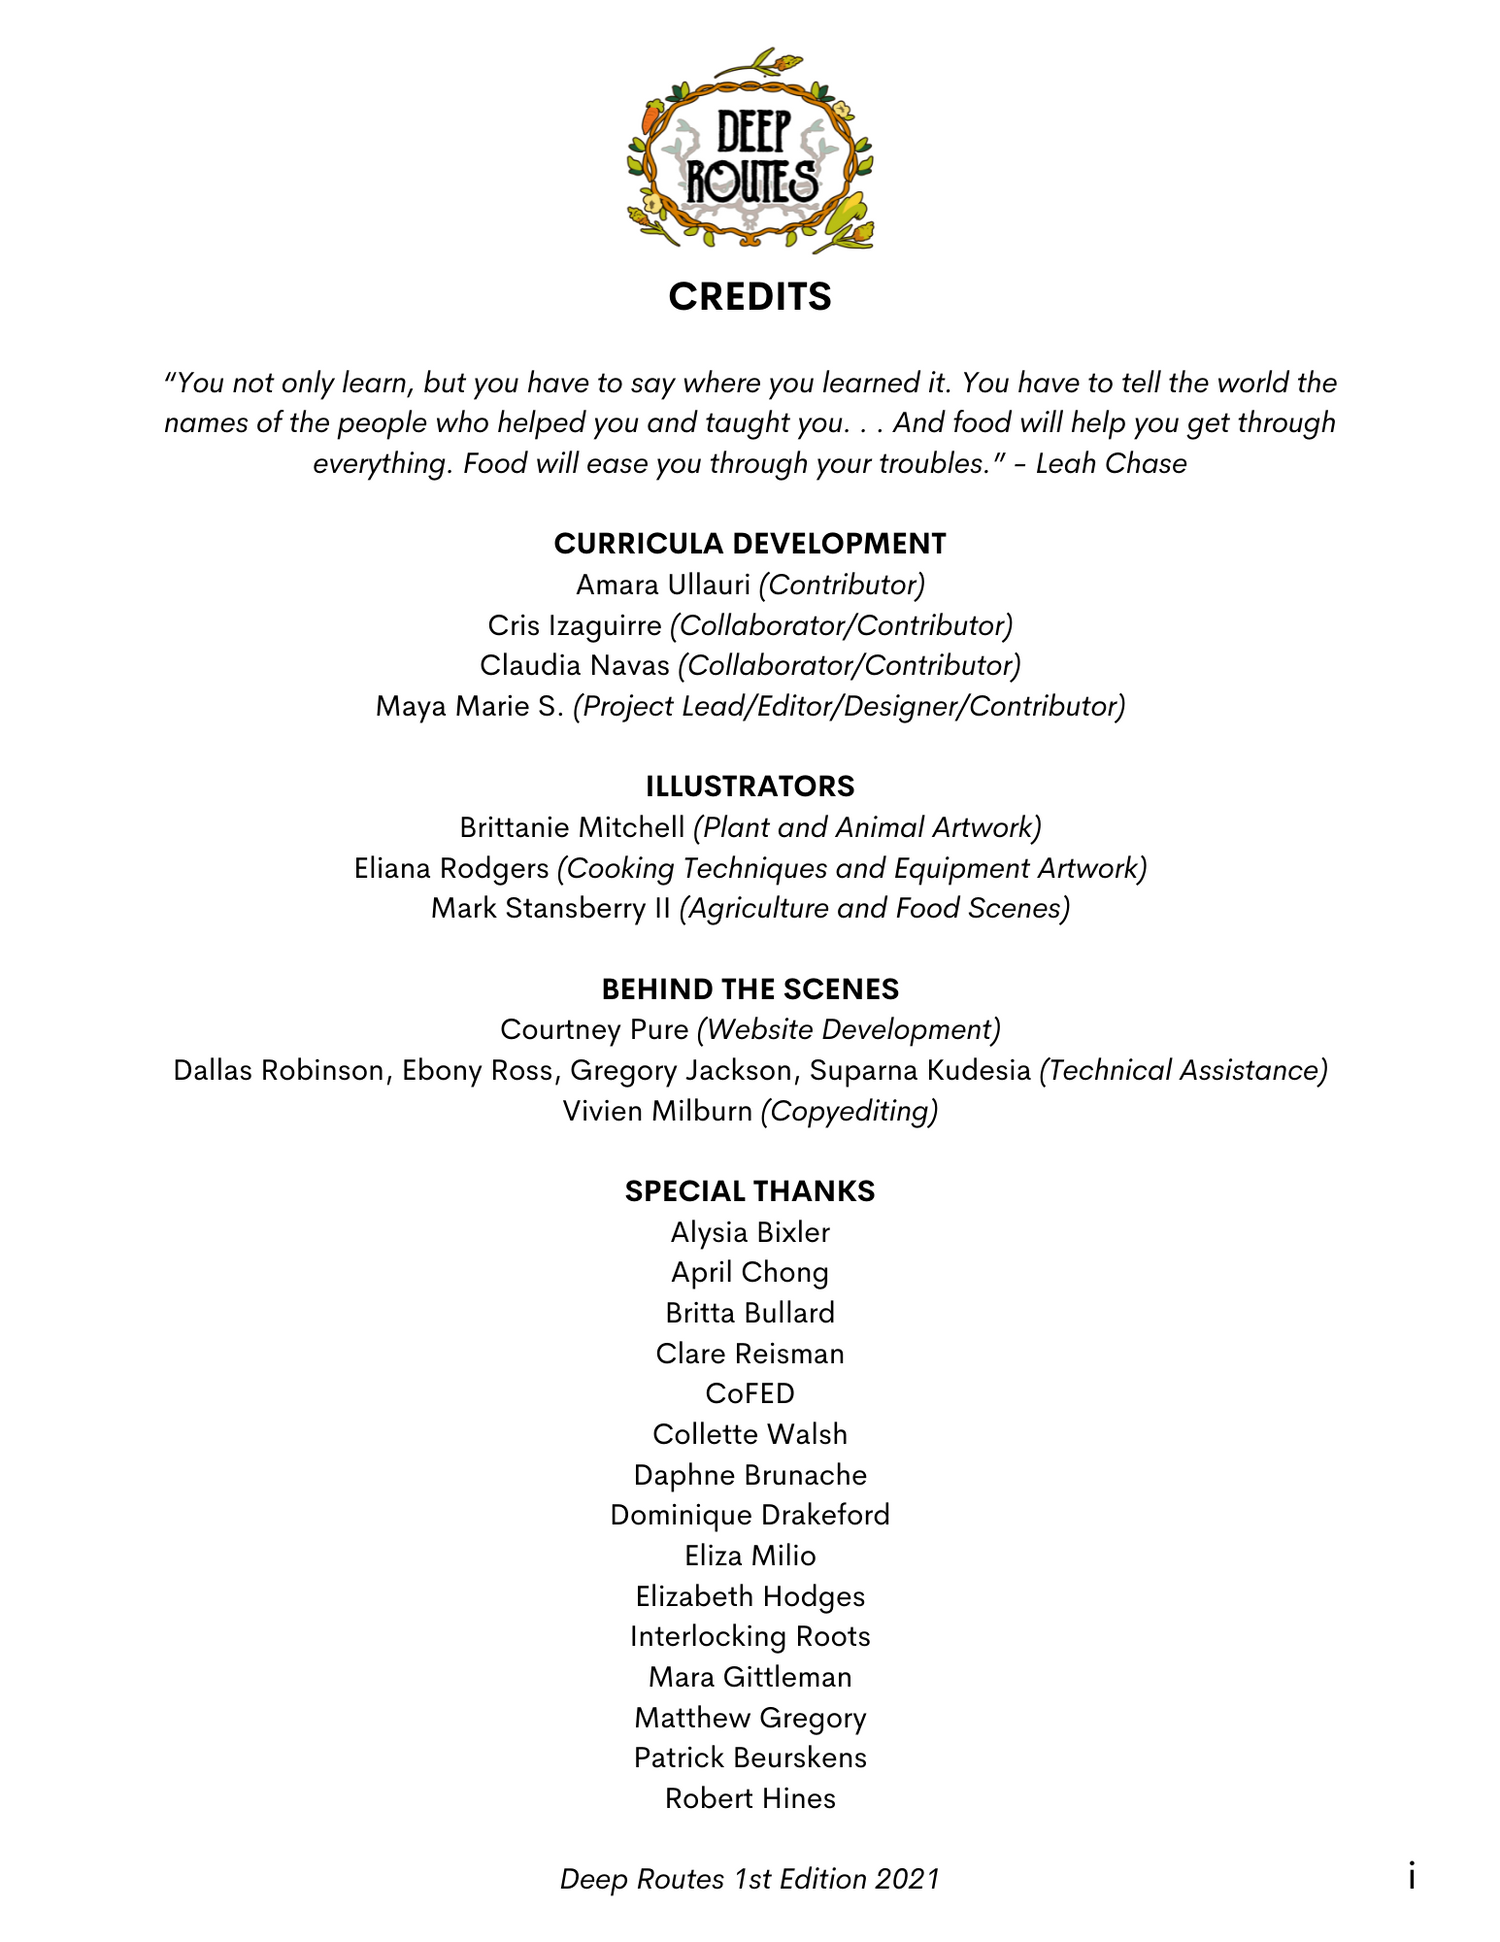 List of credits for contributors, collaborators, illustrators, and donors of the project.